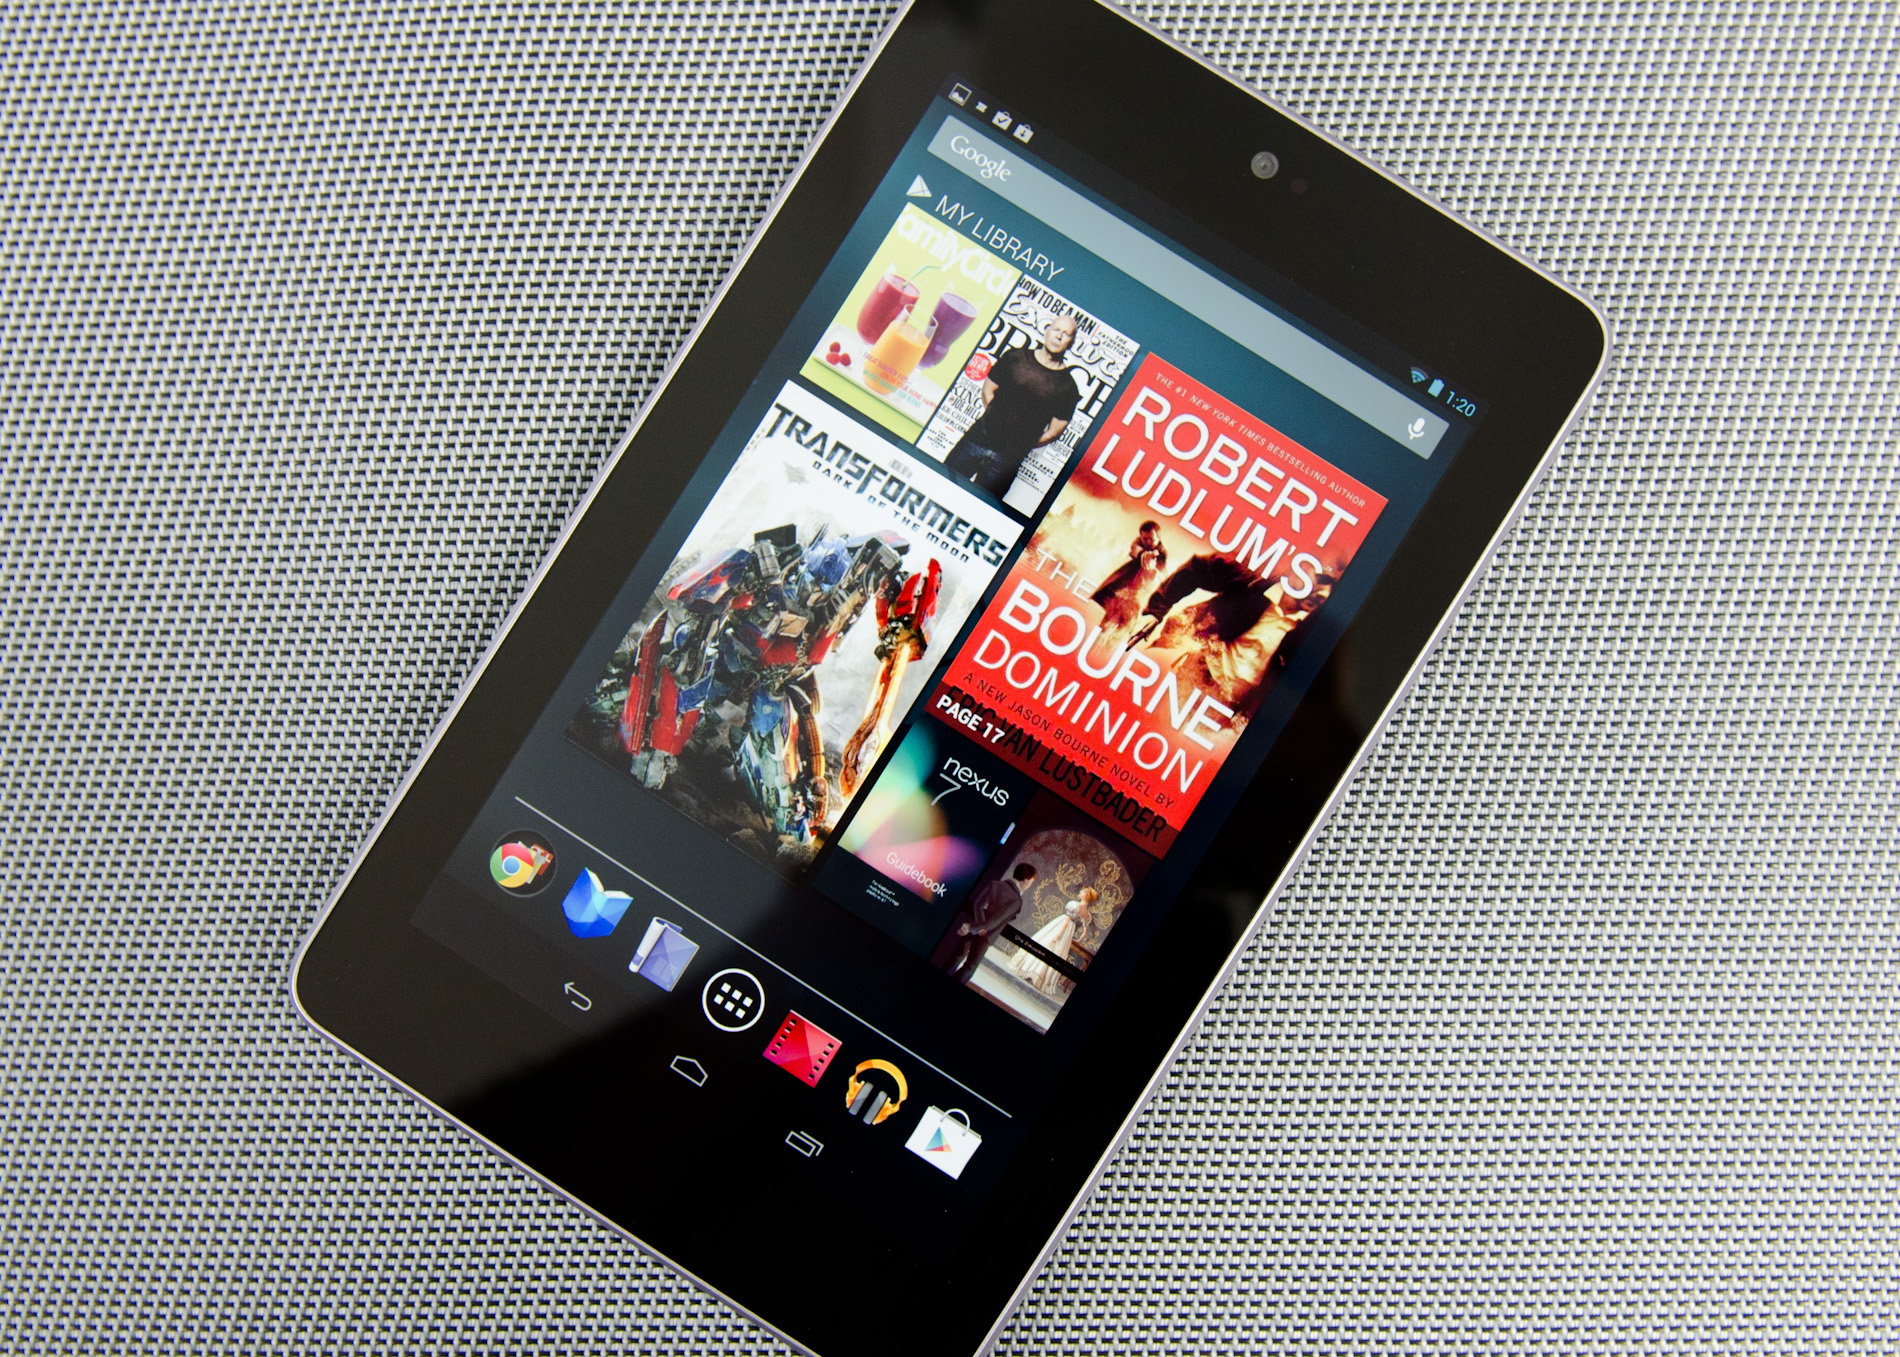 The Google Nexus 7 Review - Tablets